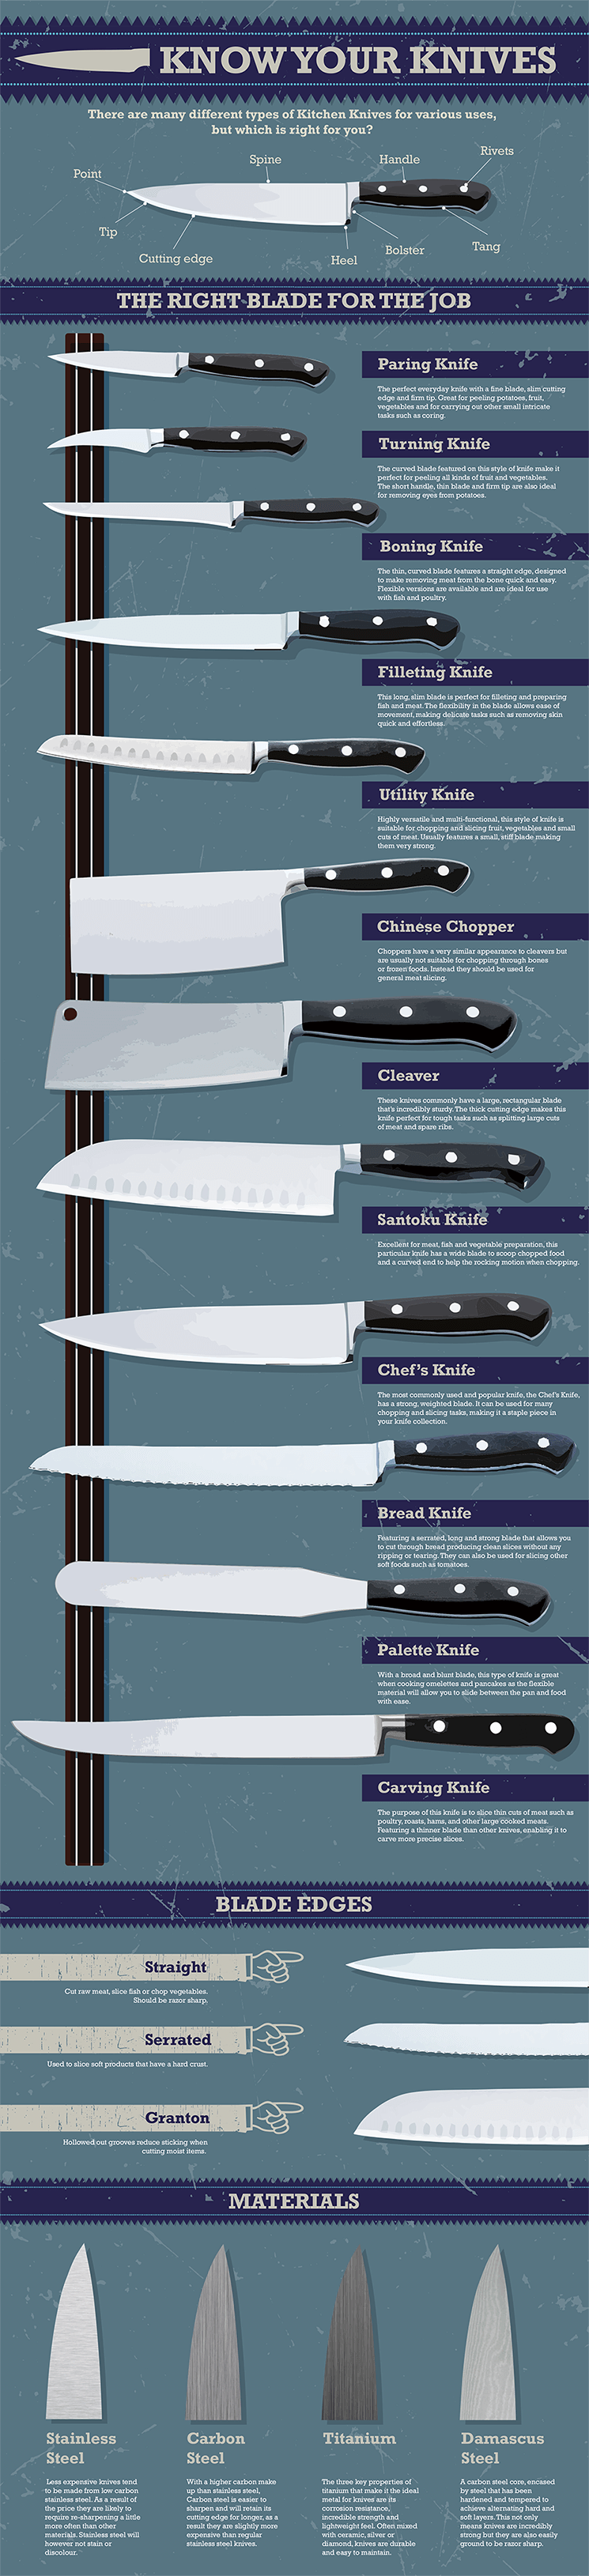 Know Your Knives: Kitchen Knife Basics - Infographic